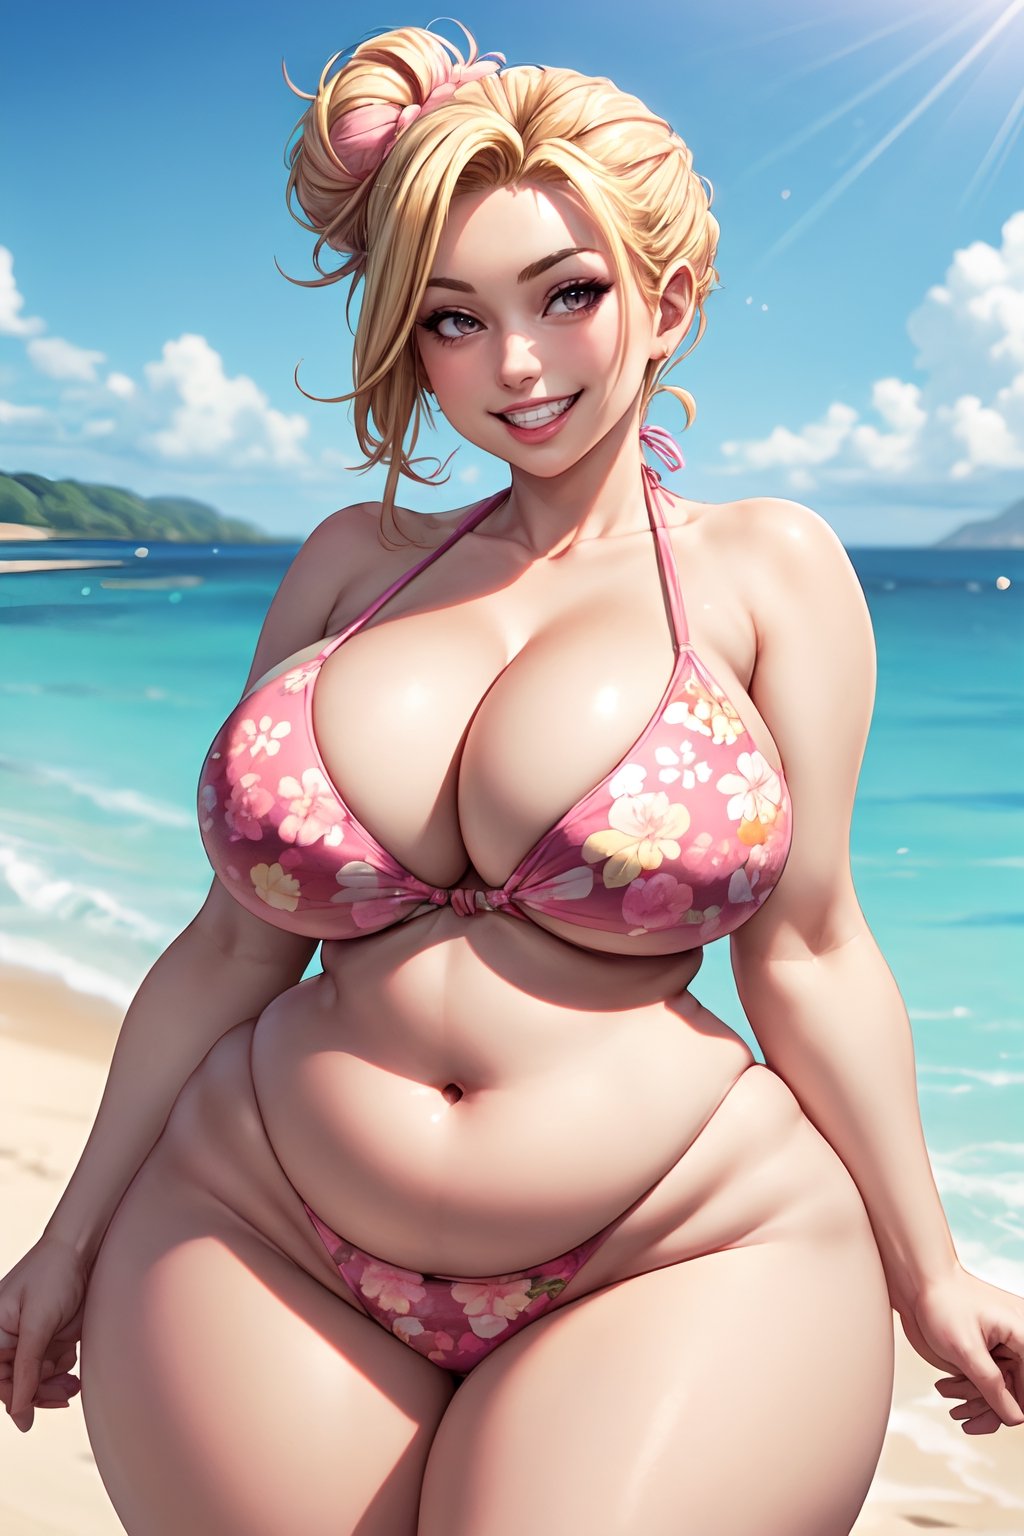 Underrated Models Organization on X: Slim Girl with Big Boobies are Pure  Lustie Material 😋😋😋 Because of Some Personal Reasons   / X